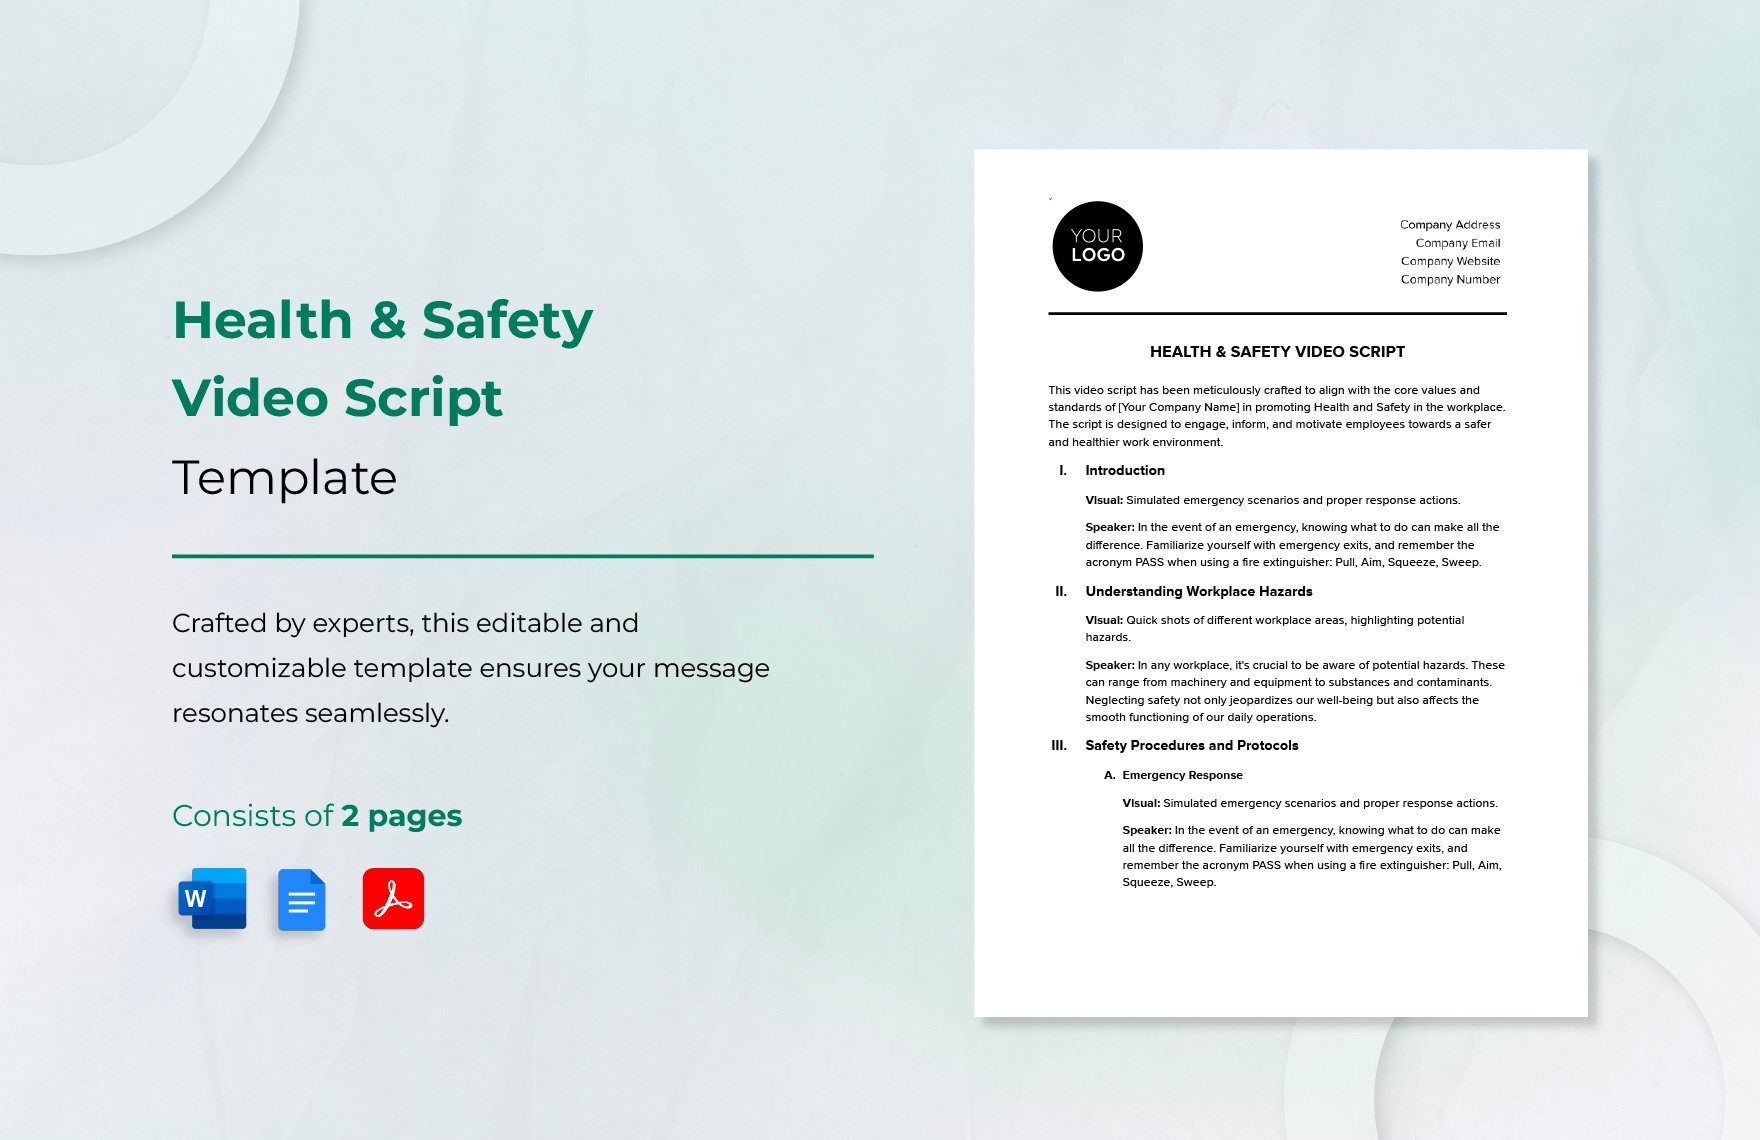 Health & Safety Video Script Template